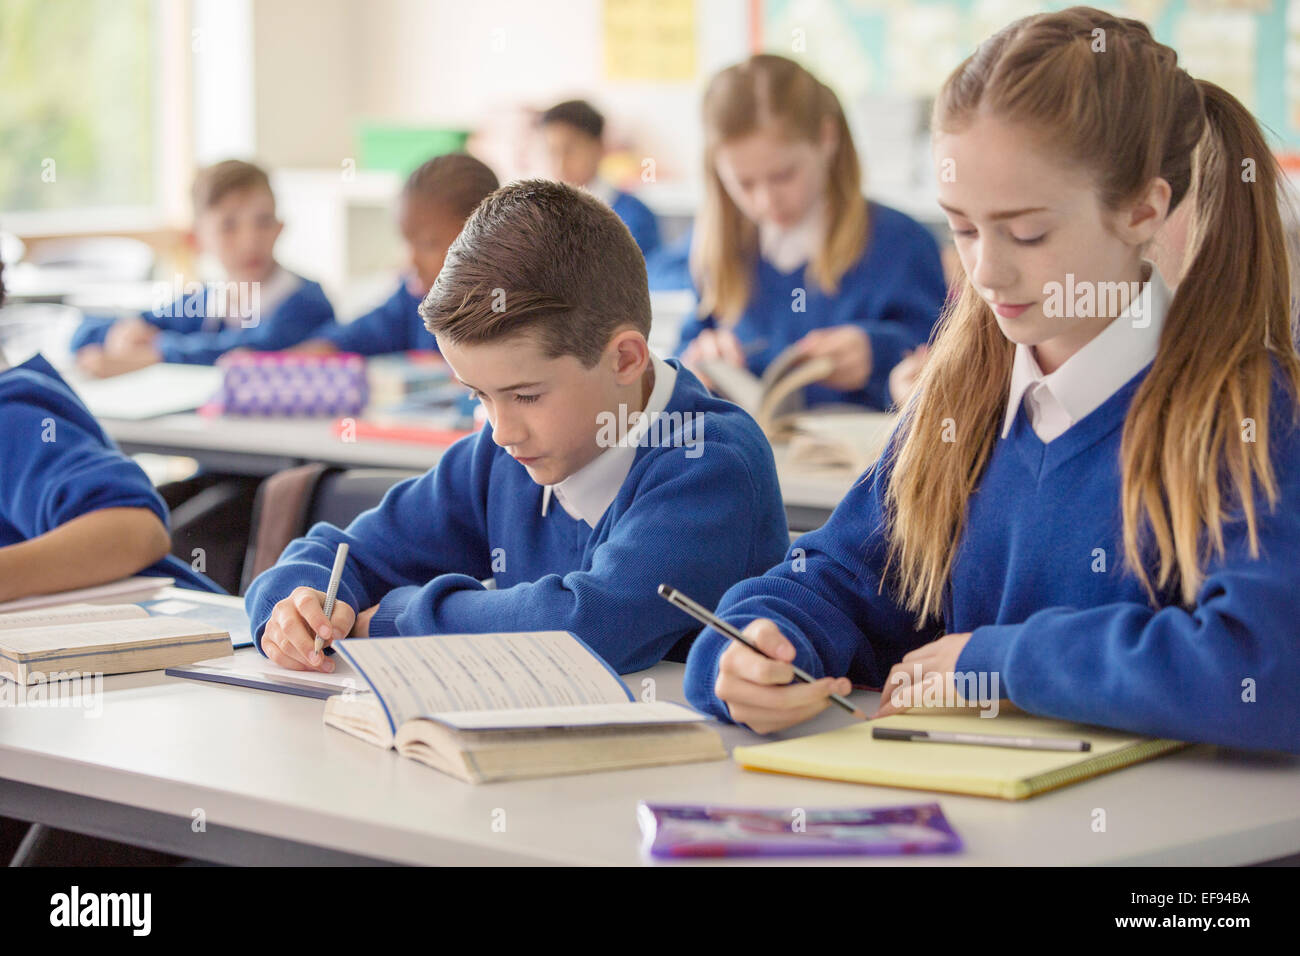 Elementary school children working at desk in classroom during lesson Stock Photo